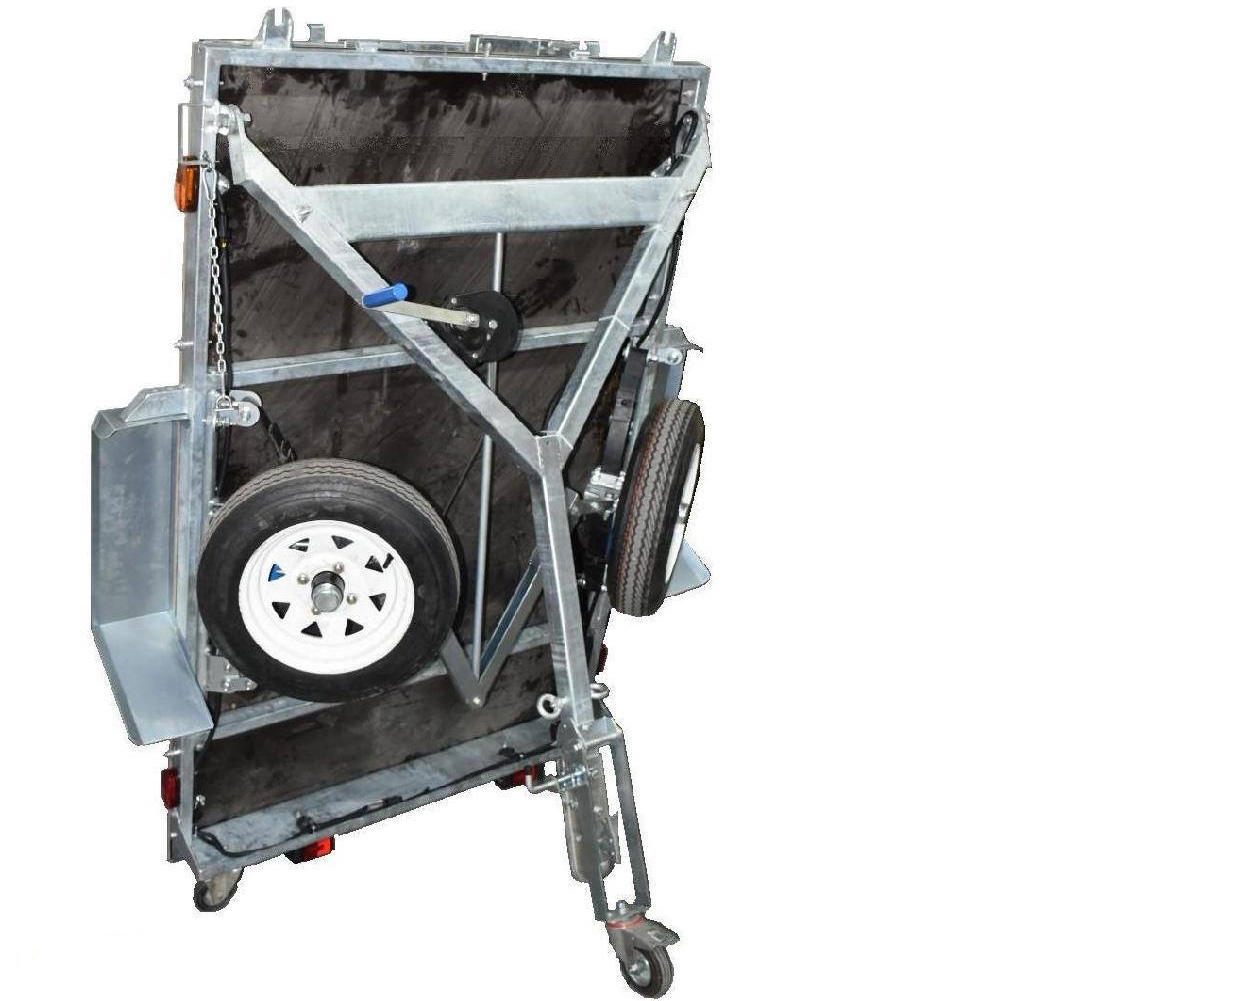 Snowaves Mechanical trailer fold up trailer company for trips-2